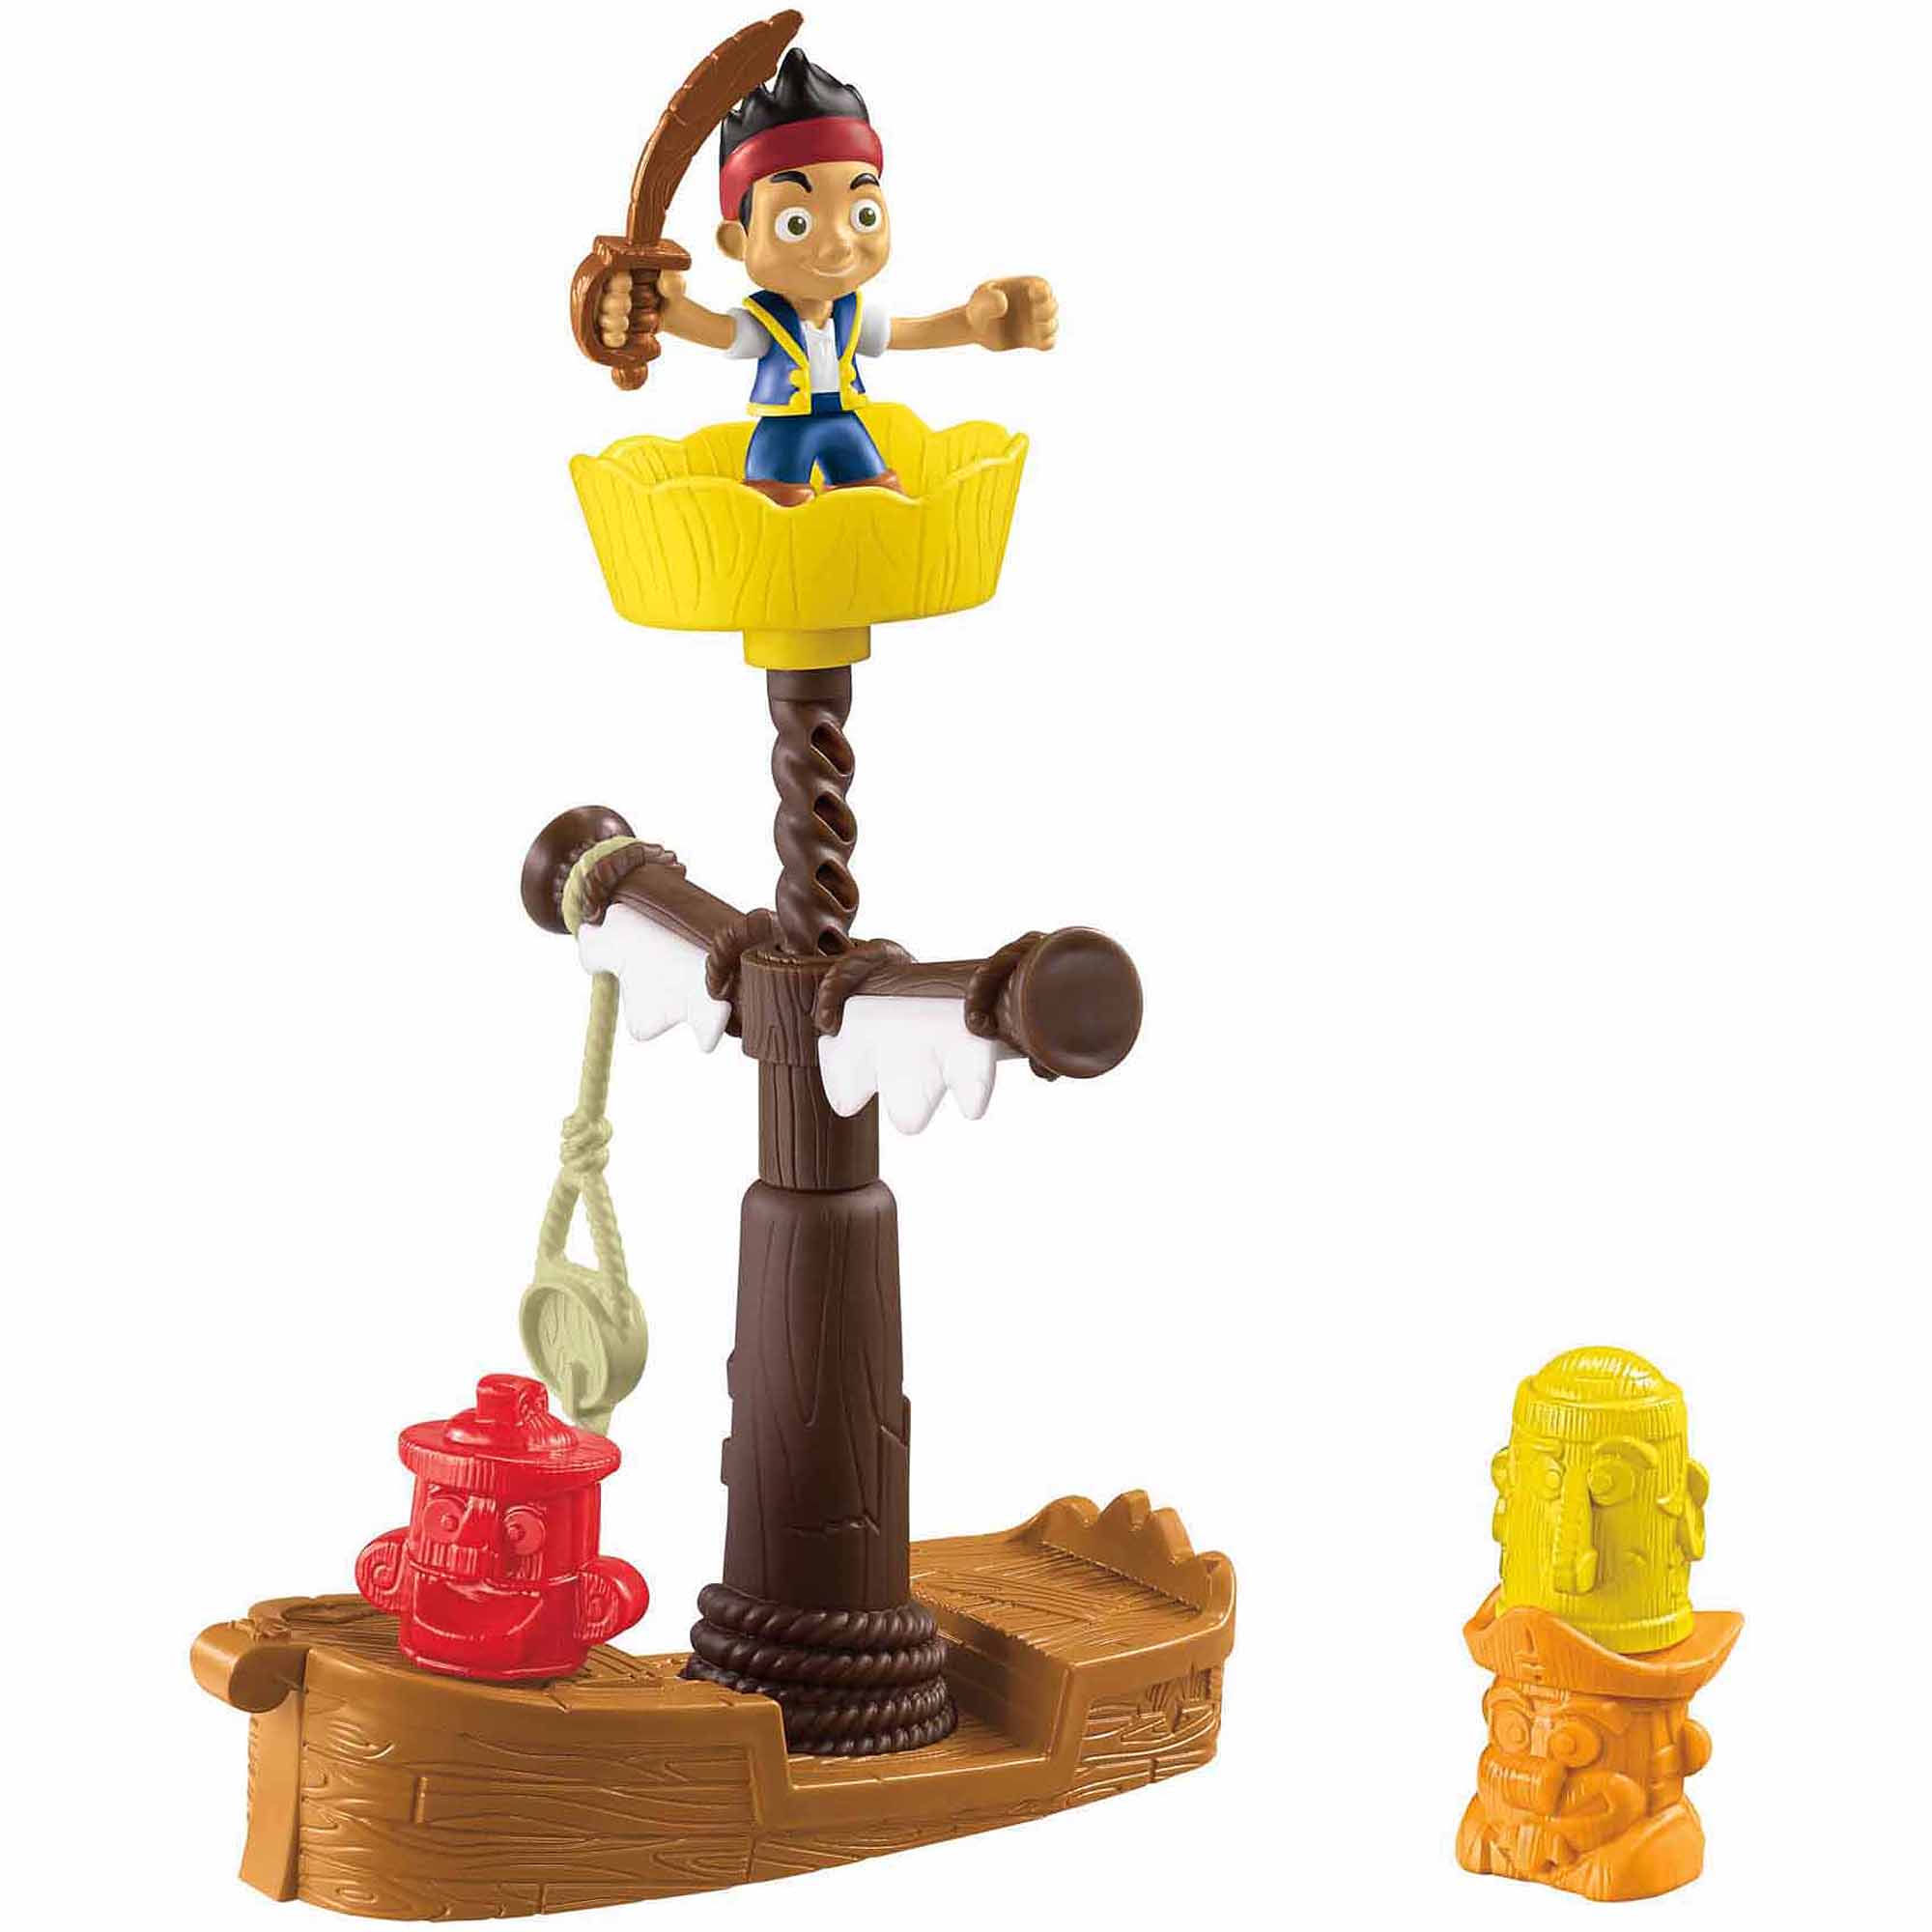 Jake and the Never Land Pirates Buccaneer Battling Captain Jake - image 1 of 2